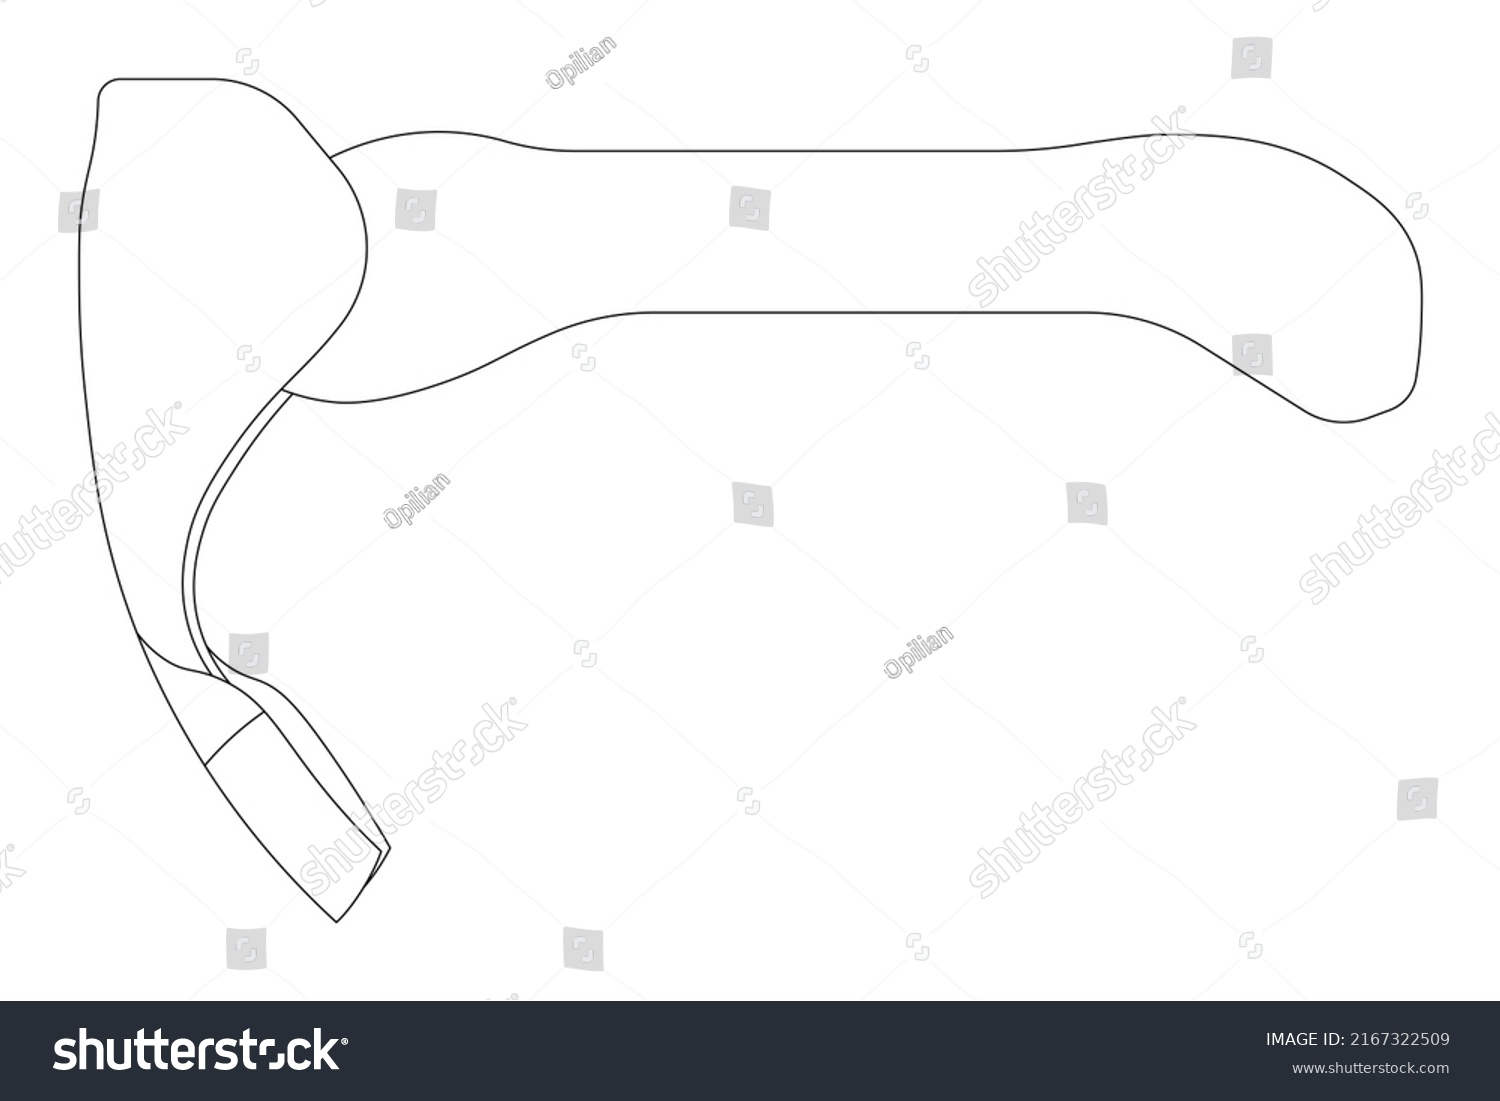 SVG of Adze isolated outline vector on white background. This cutting tool is used for removing heavy waste, leveling, shaping, or trimming the surfaces of timber. svg